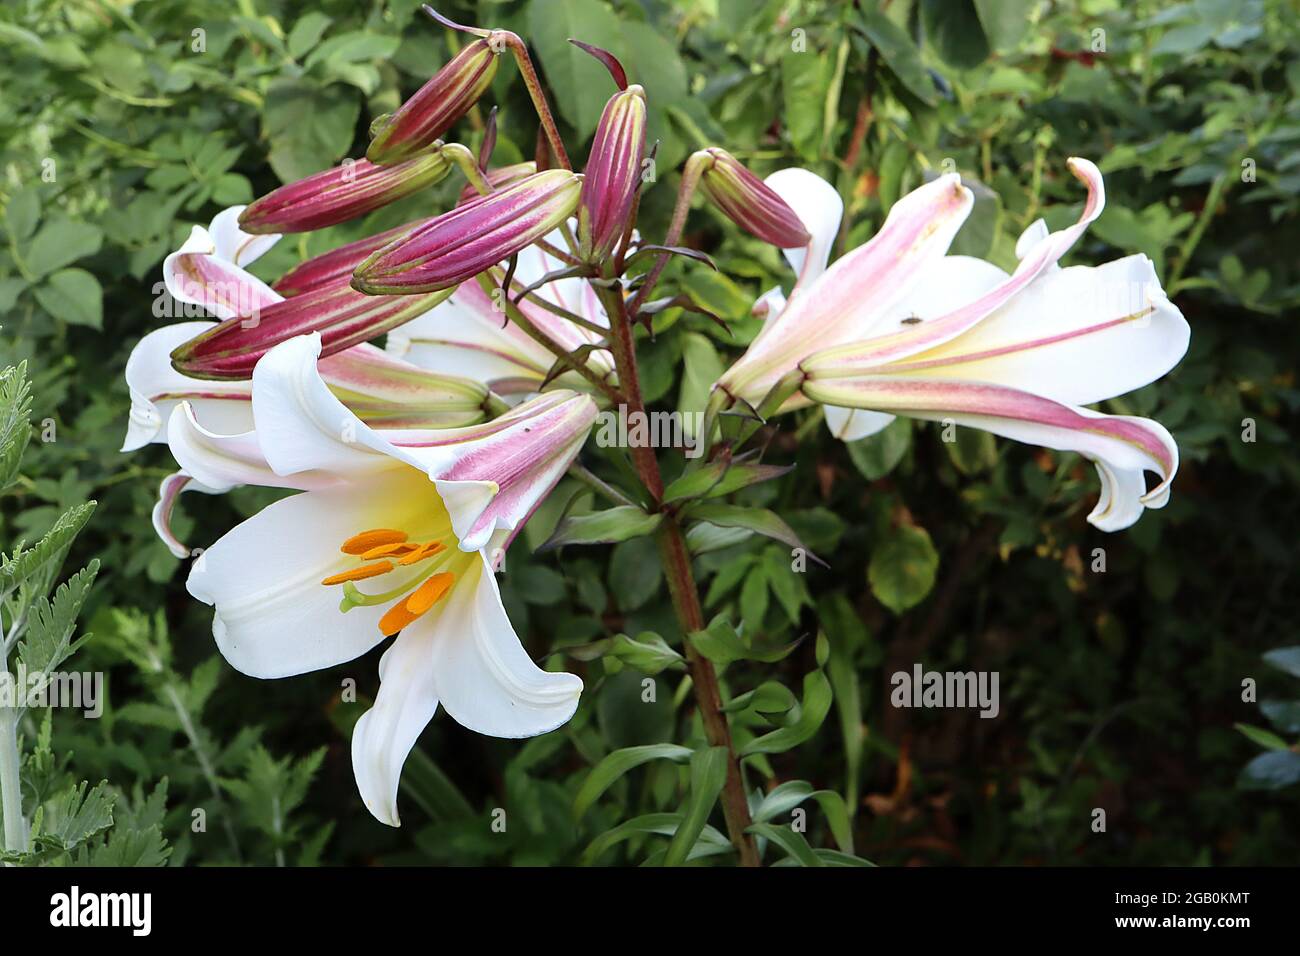 Lilium regale FLOWERS Royal lily – strongly scented large white  trumpet-shaped flowers with pink petal backs on very tall stems, June,  England, UK Stock Photo - Alamy